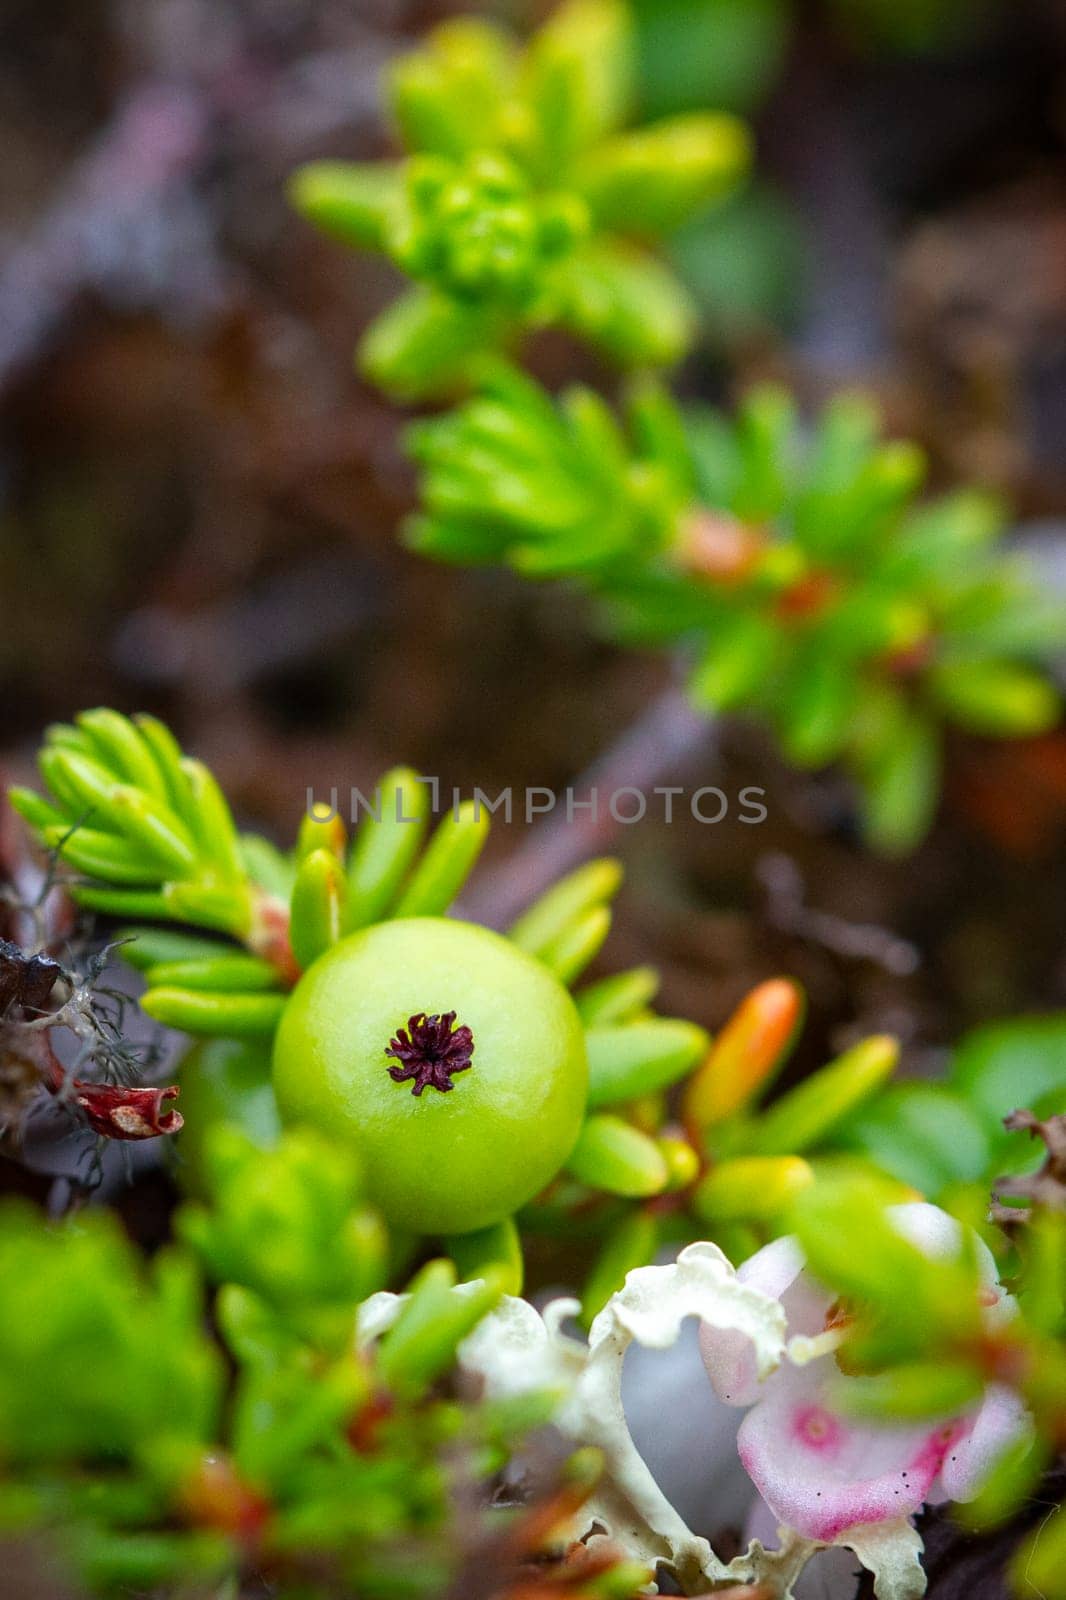 Closeup of a crowberry in its green phase found on the arctic tundra by Granchinho